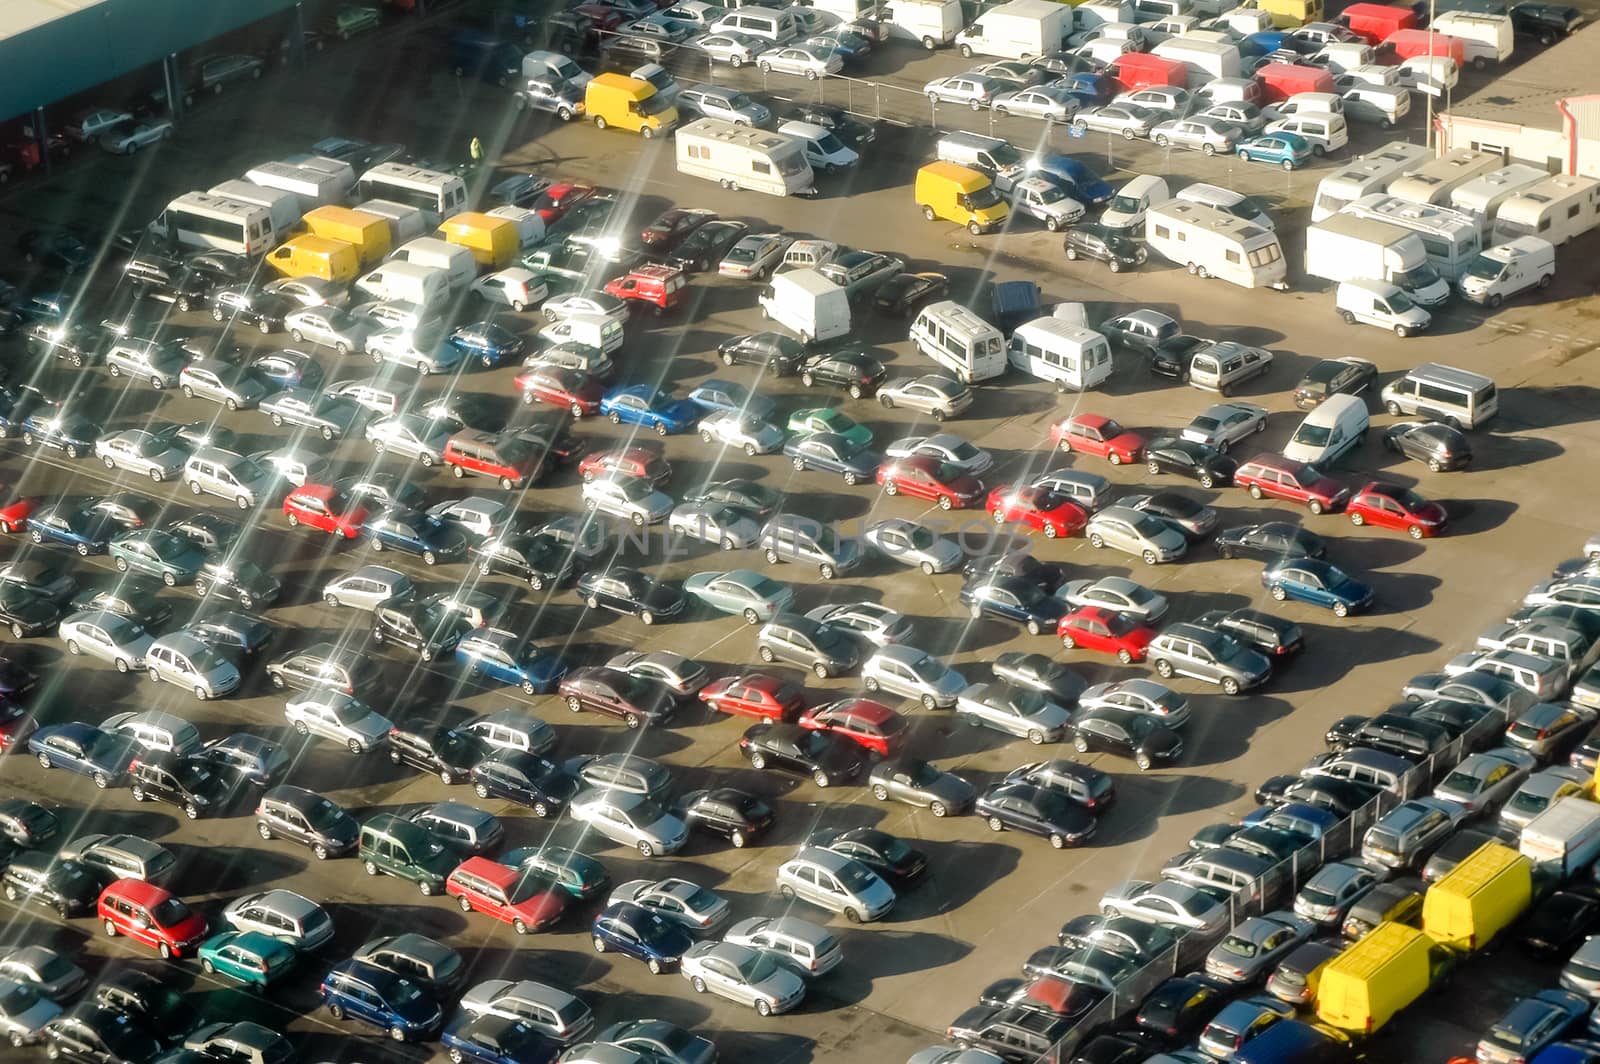 aerial view of vehicles in a parking lot - no visible trademarks